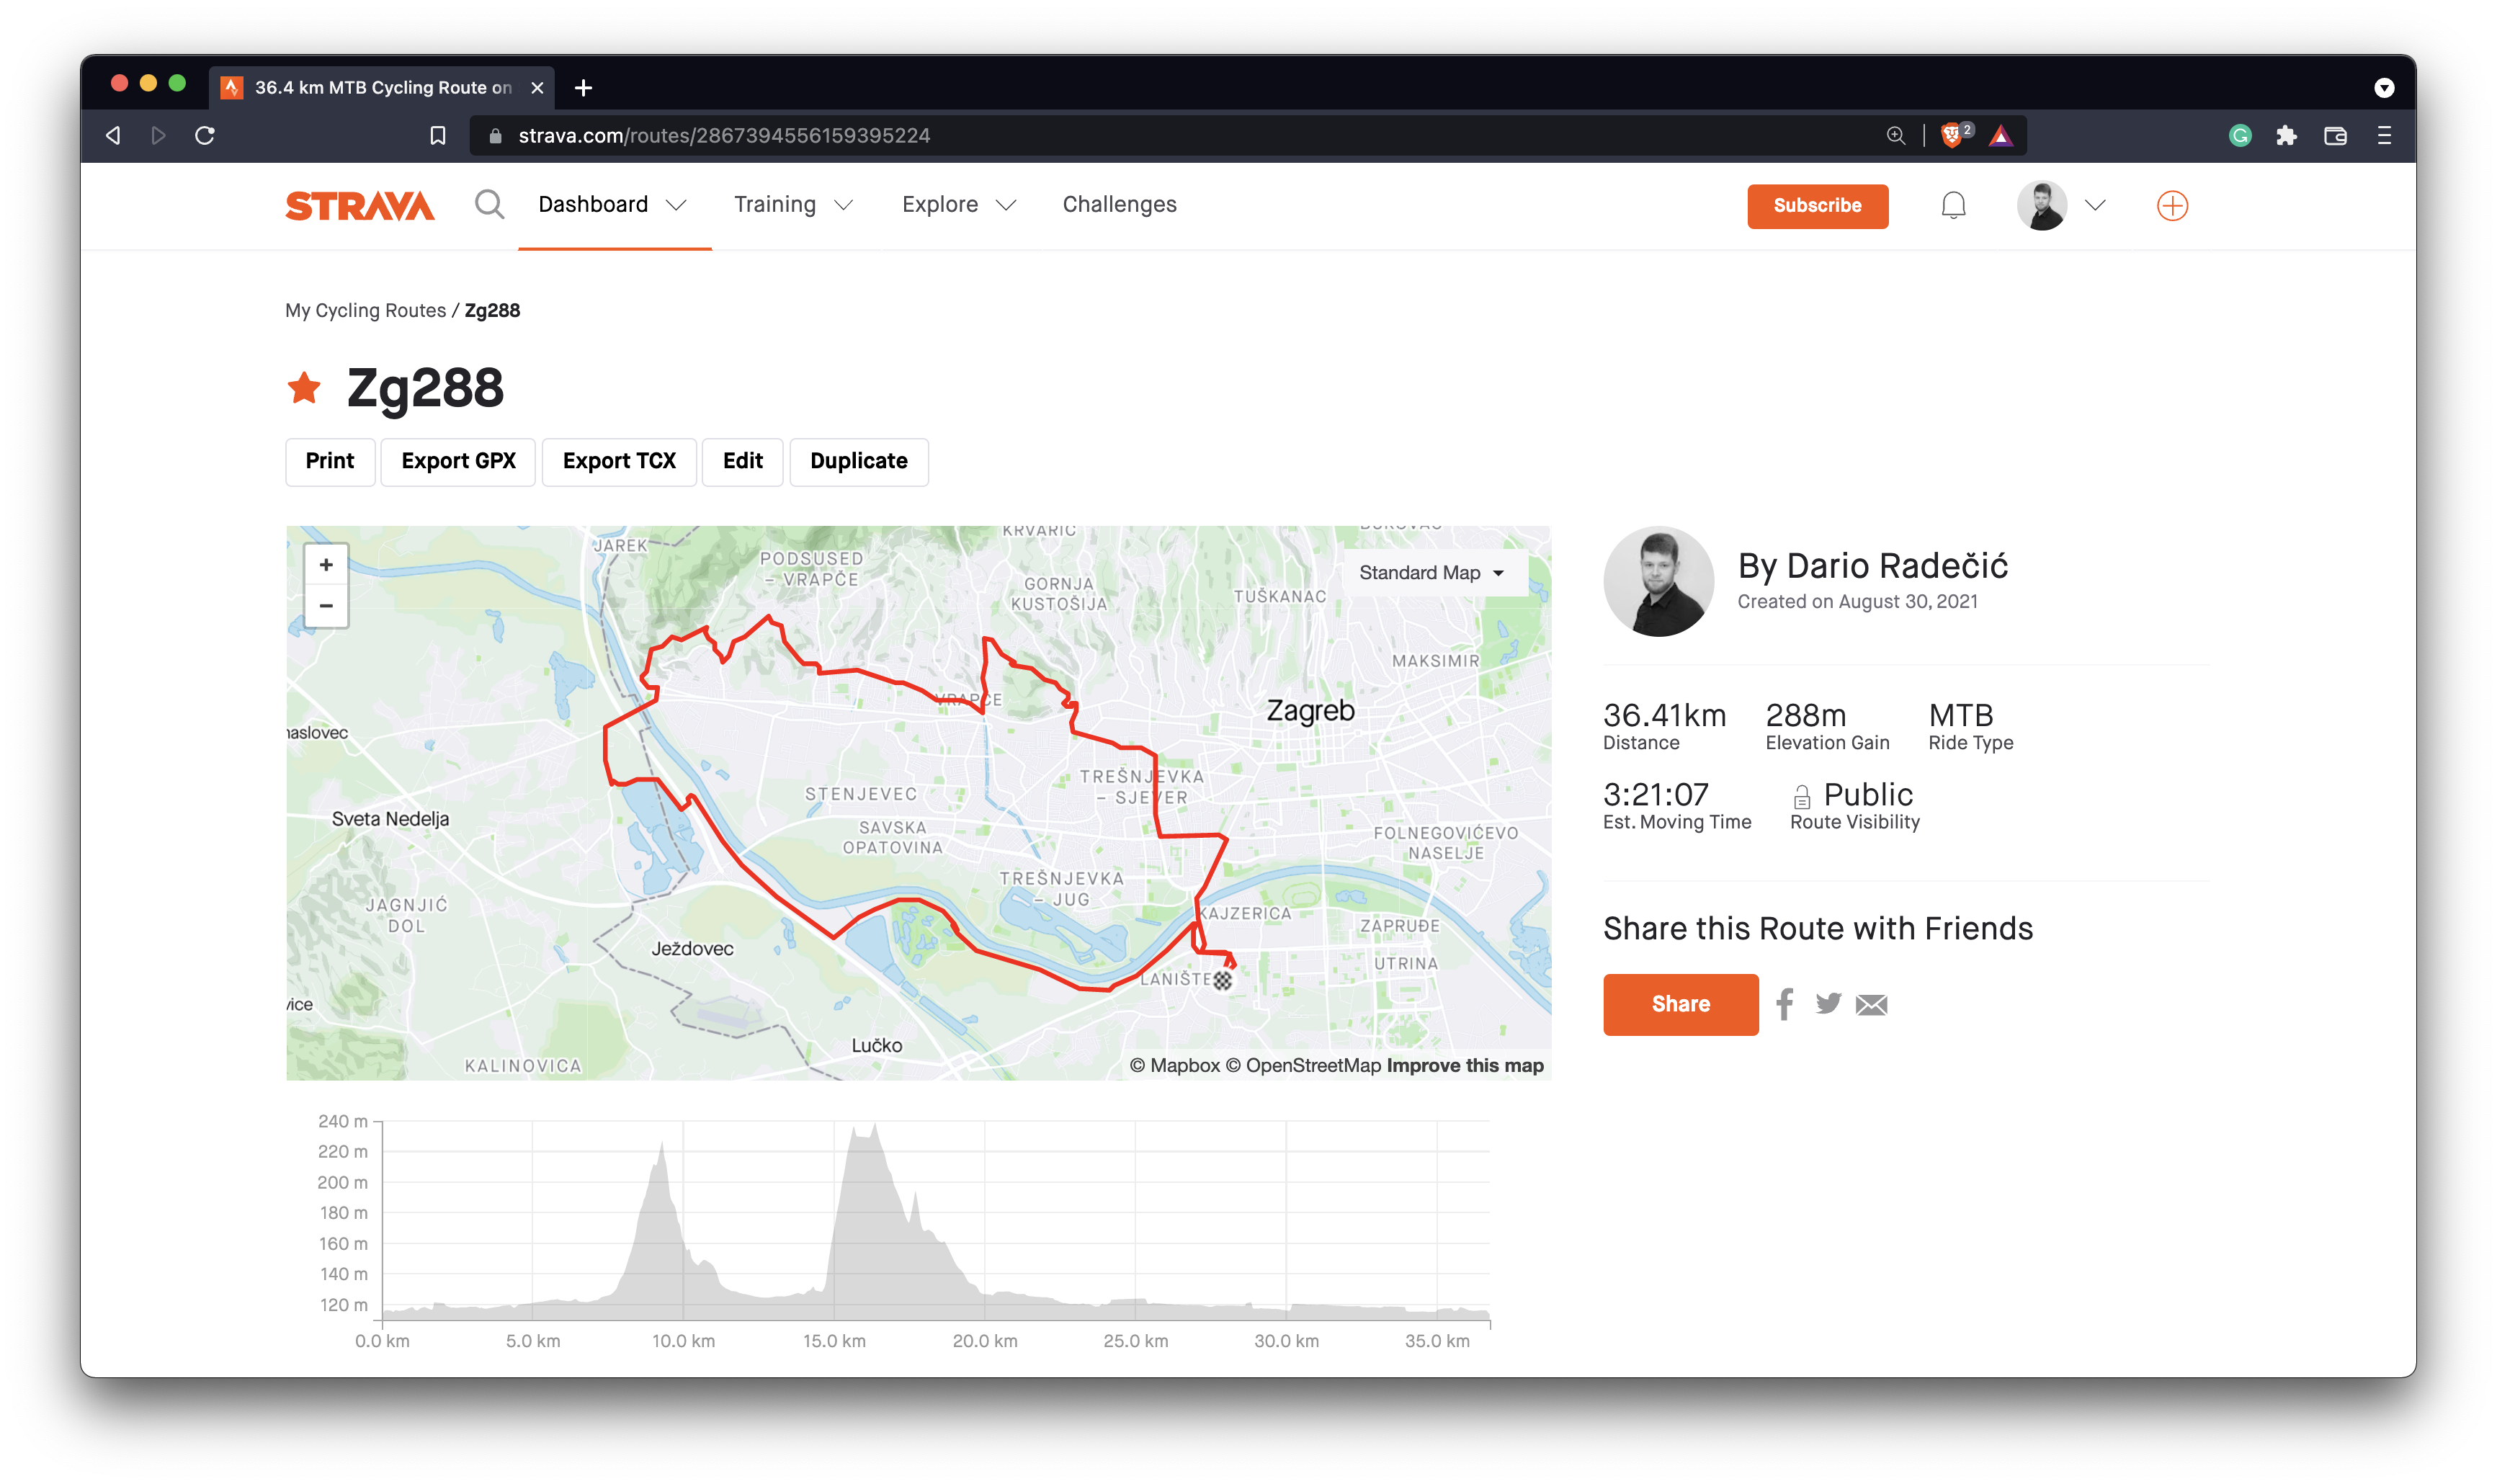 Image 1 — A roundtrip Strava route in Zagreb, Croatia (image by author)